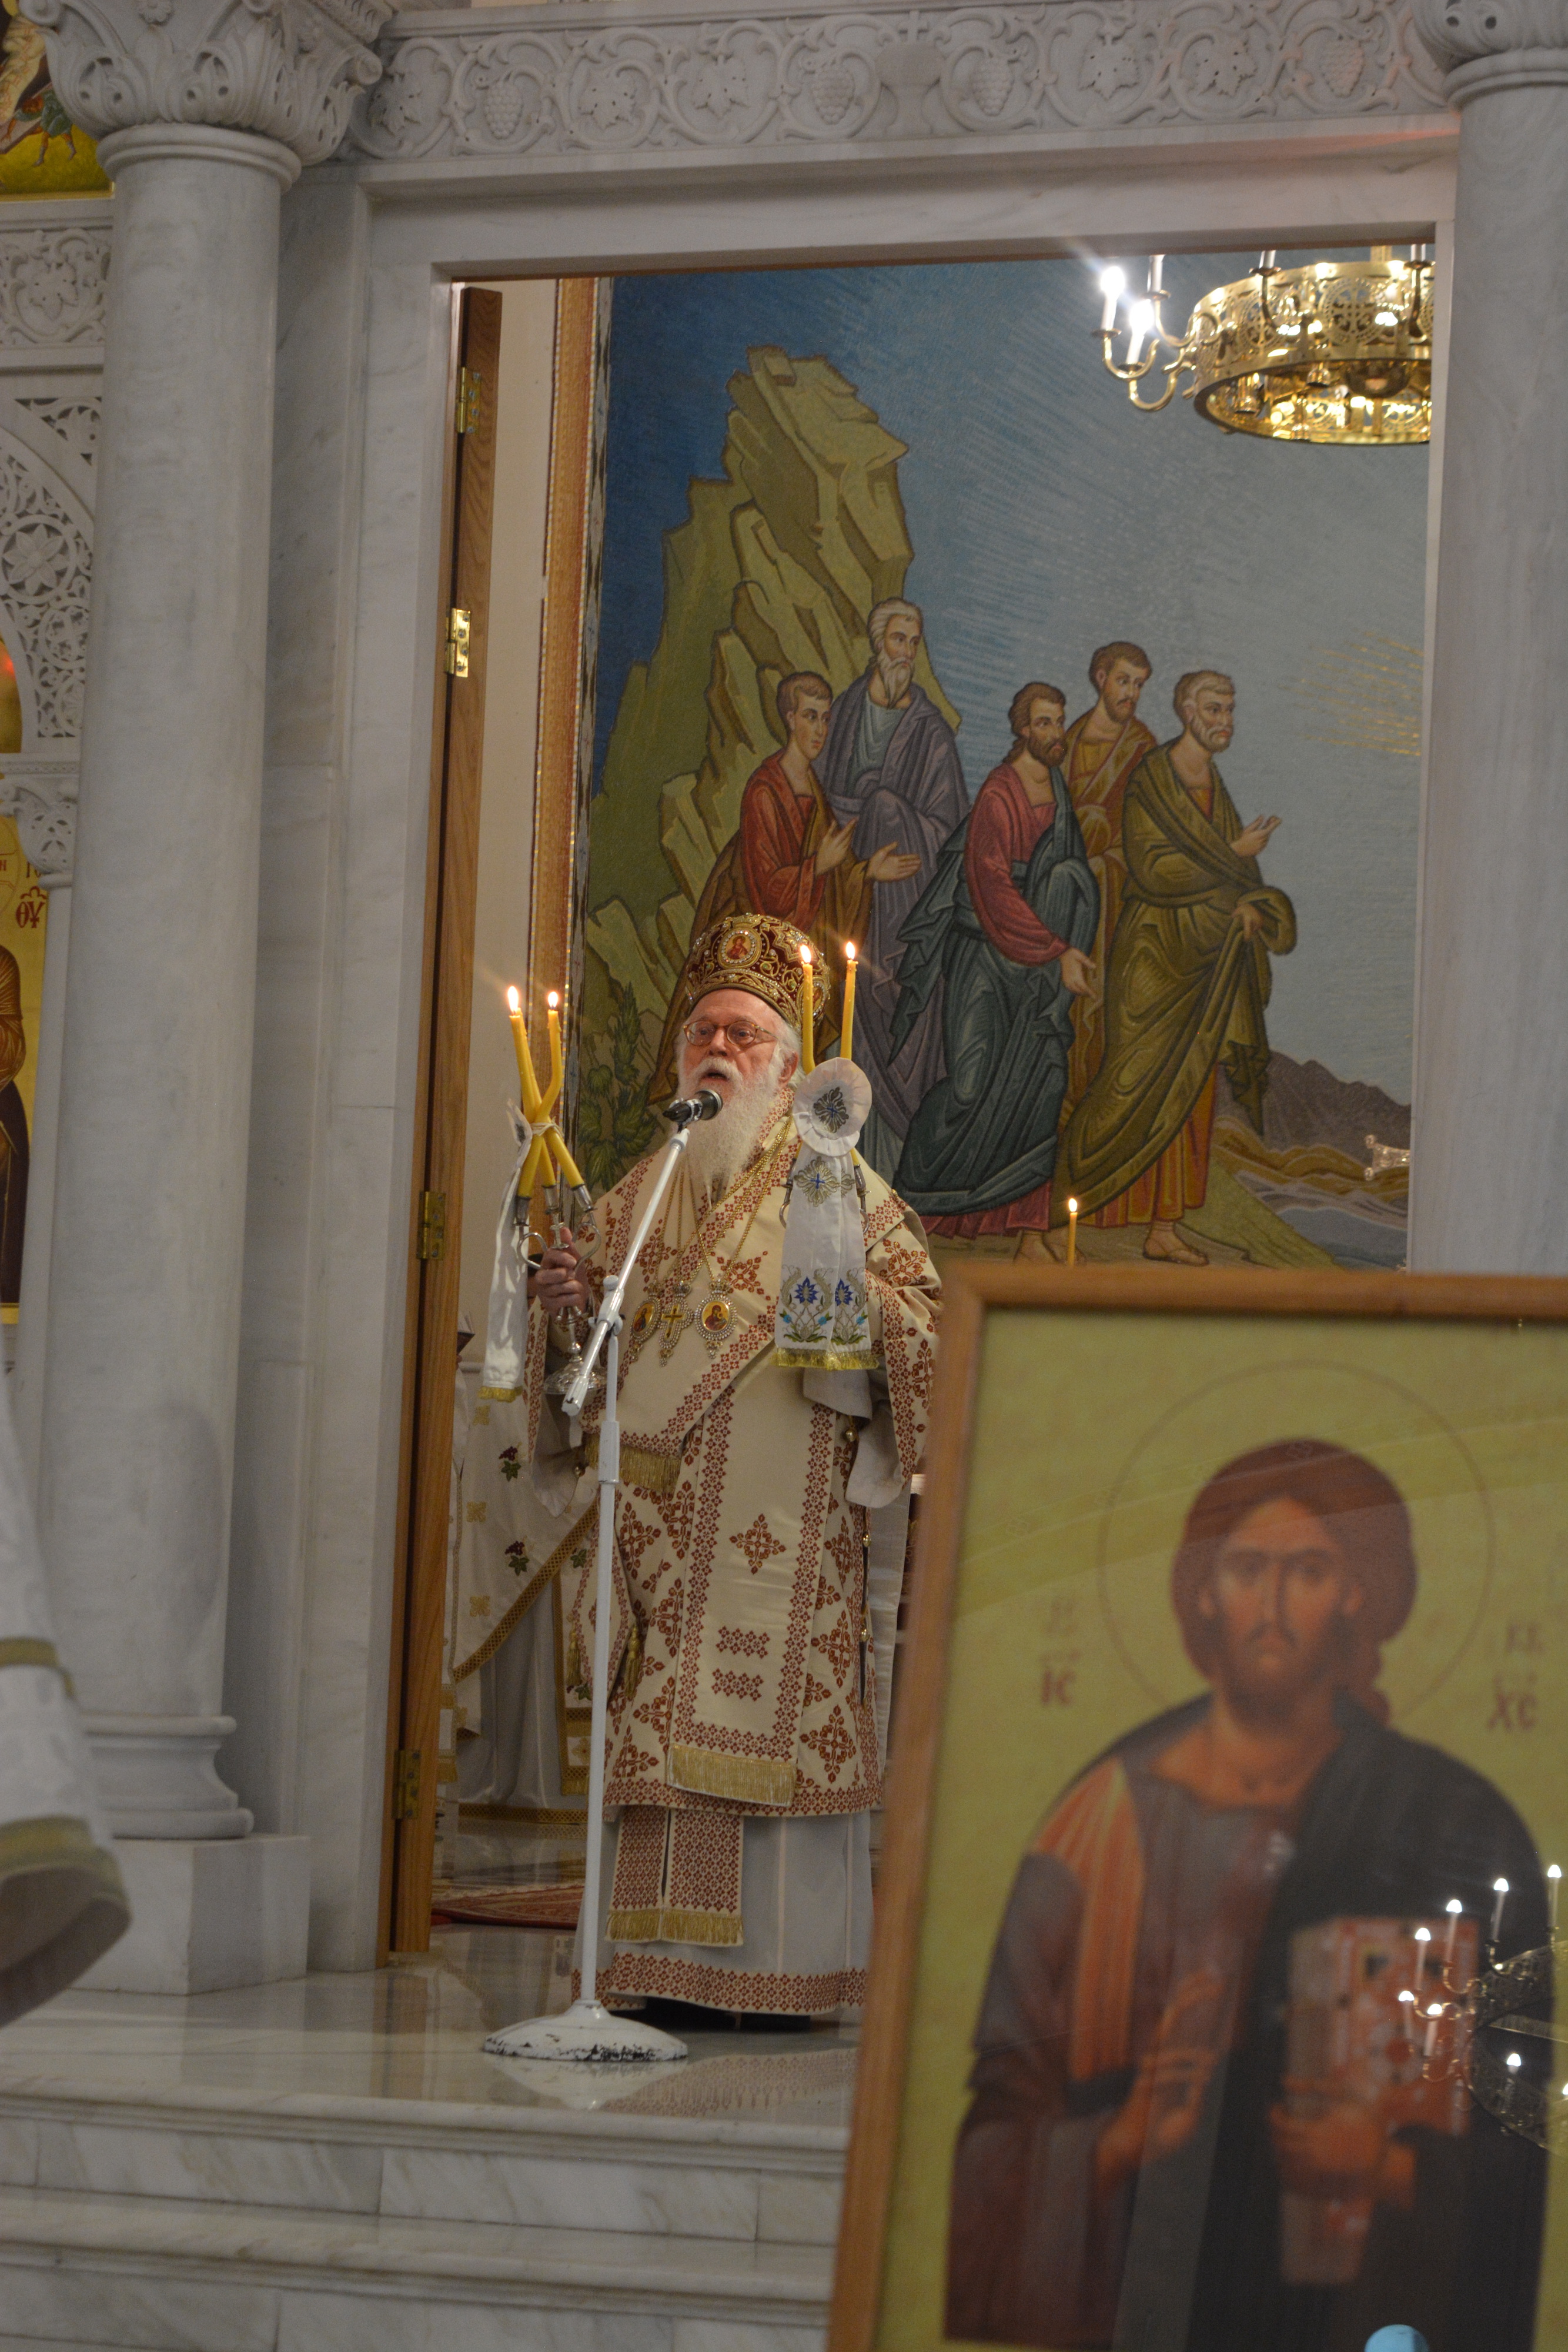 Archbishop Anastasios, blessing the people